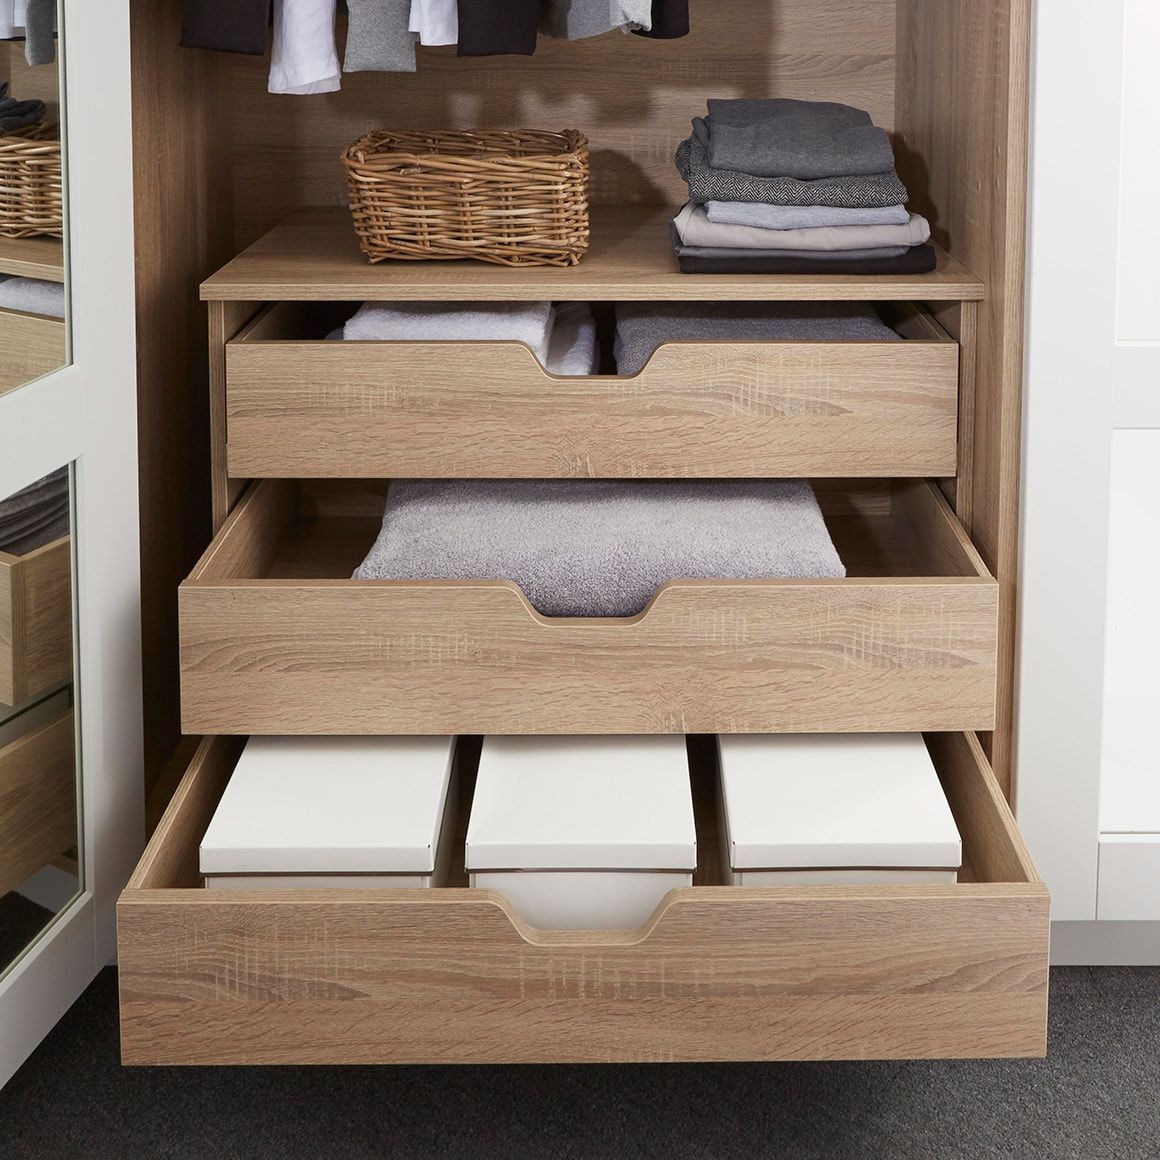 Wardrobe Storage Solutions Ireland | The Panelling Centre Regarding Oak Wardrobes With Drawers And Shelves (View 15 of 20)